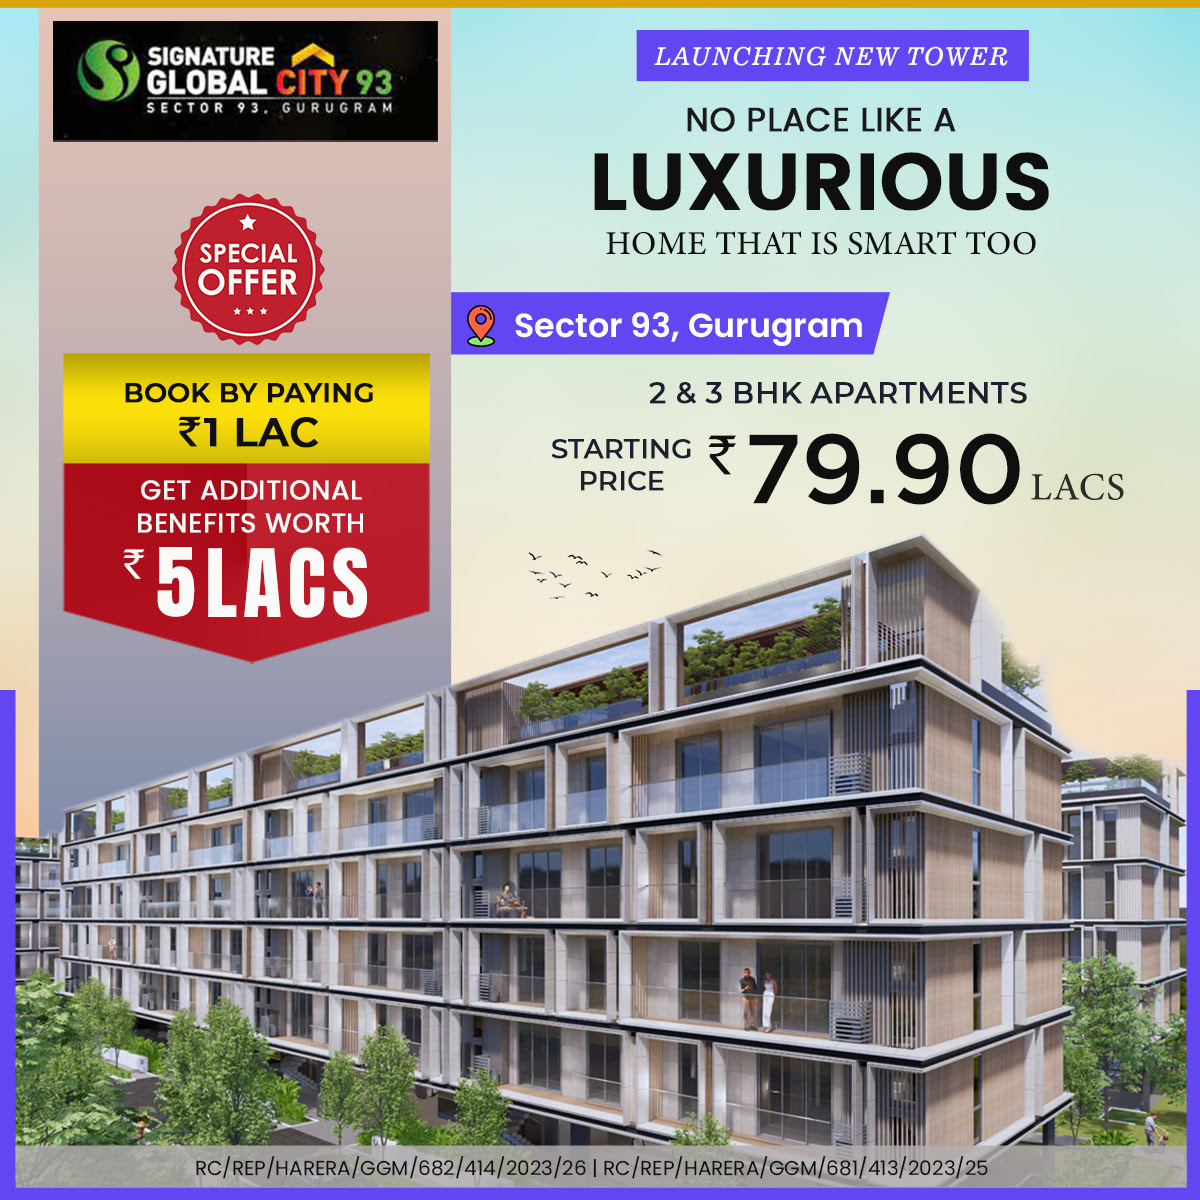 Get additional benefit worth RS 5 Lac at Signature Global City 93, Gurgaon